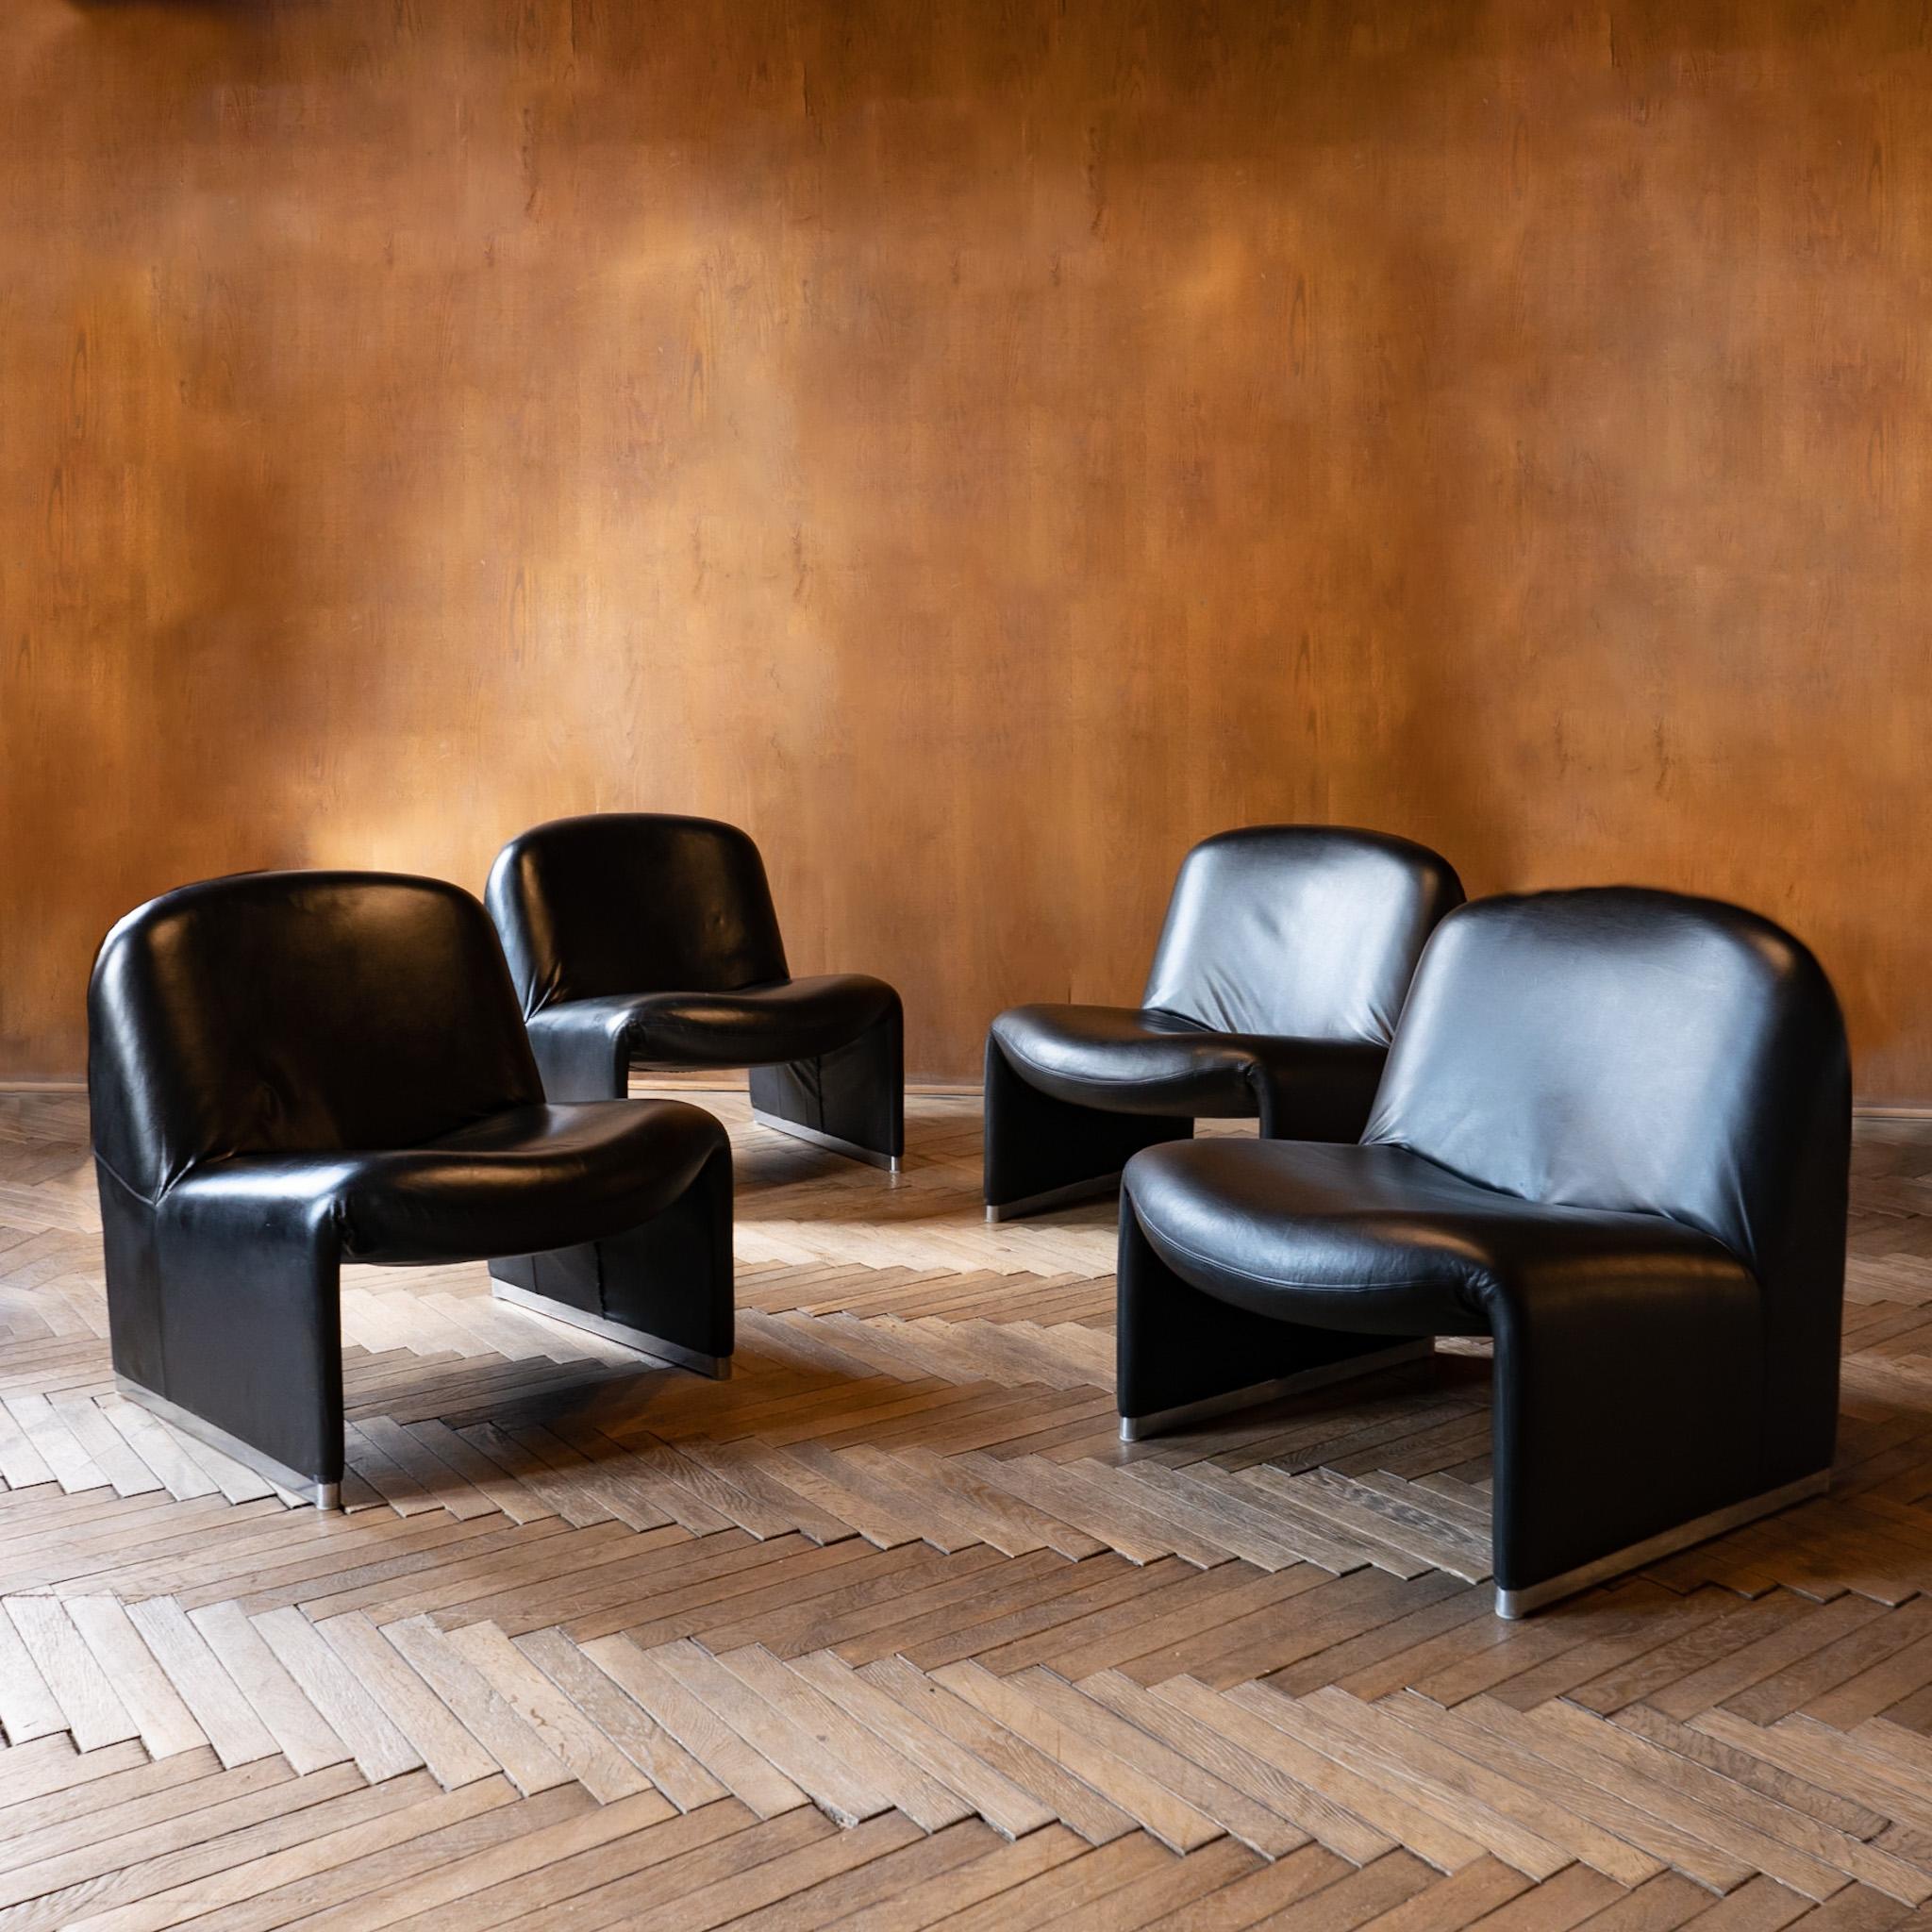 Mid-Century Modern Black Leather Alky Chairs by Giancarlo Piretti, Italy 1970s.

This set of 4 black Alky chairs in original leather upholstery were designed by Giancarlo Piretti for Castelli in the 70s.

The Alky chair is a stunning example of